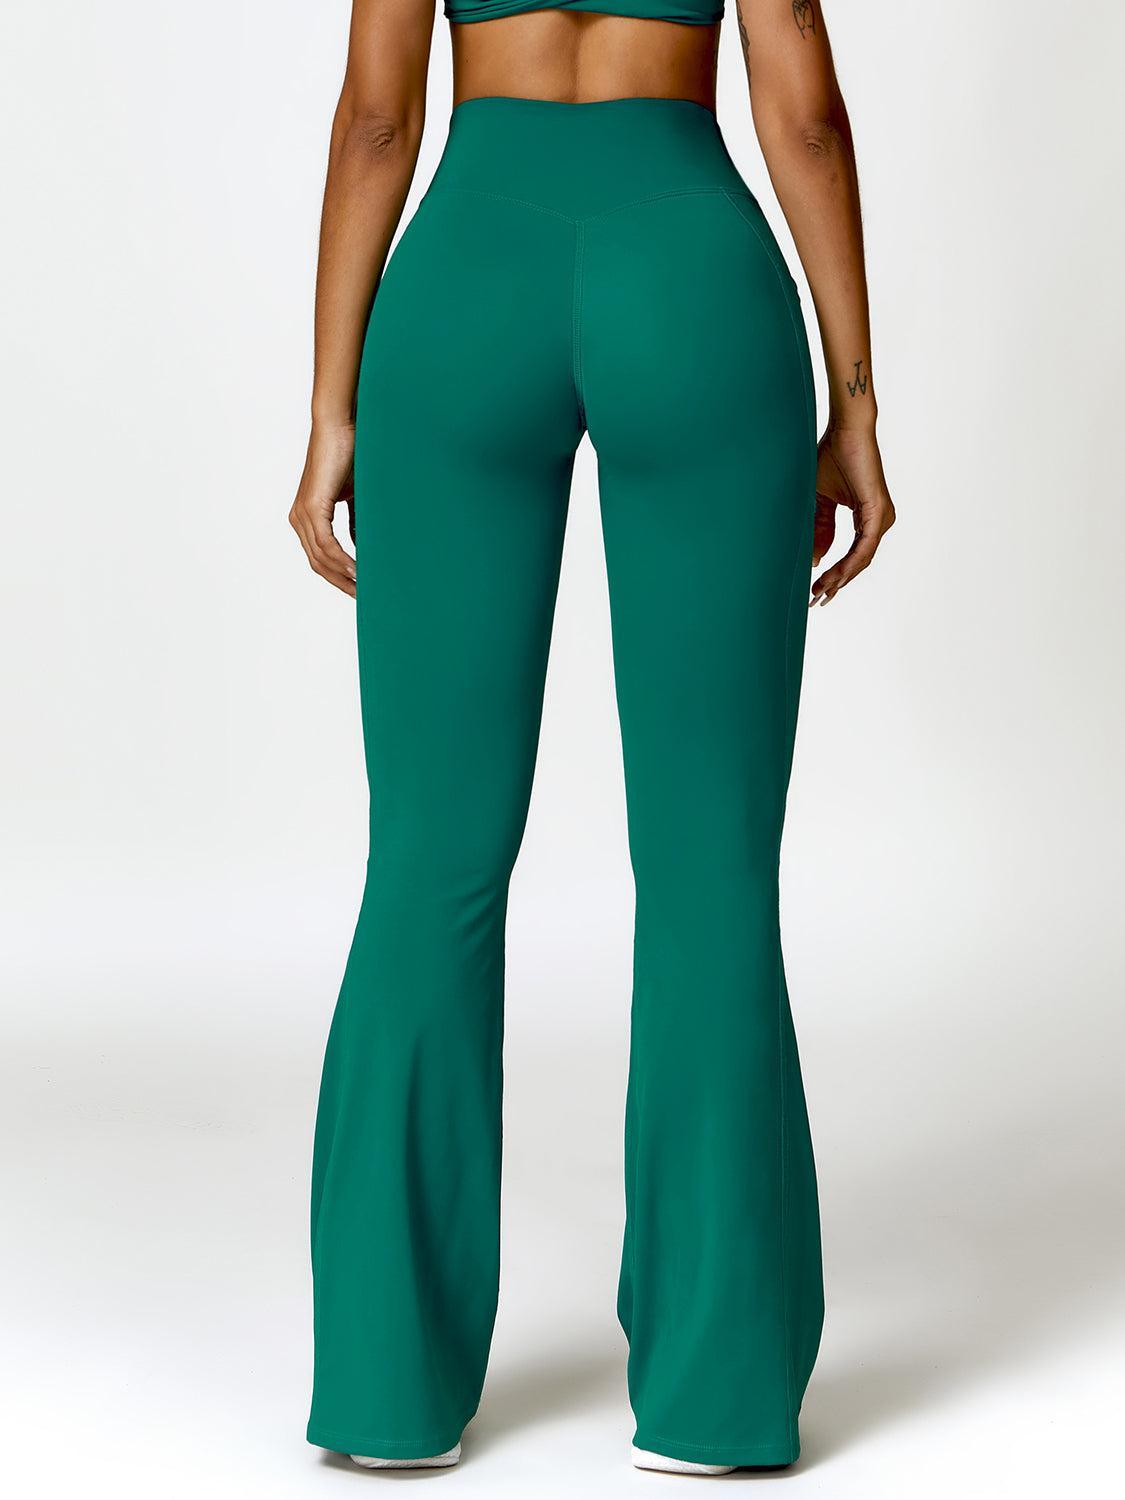 a woman in a green top and pants